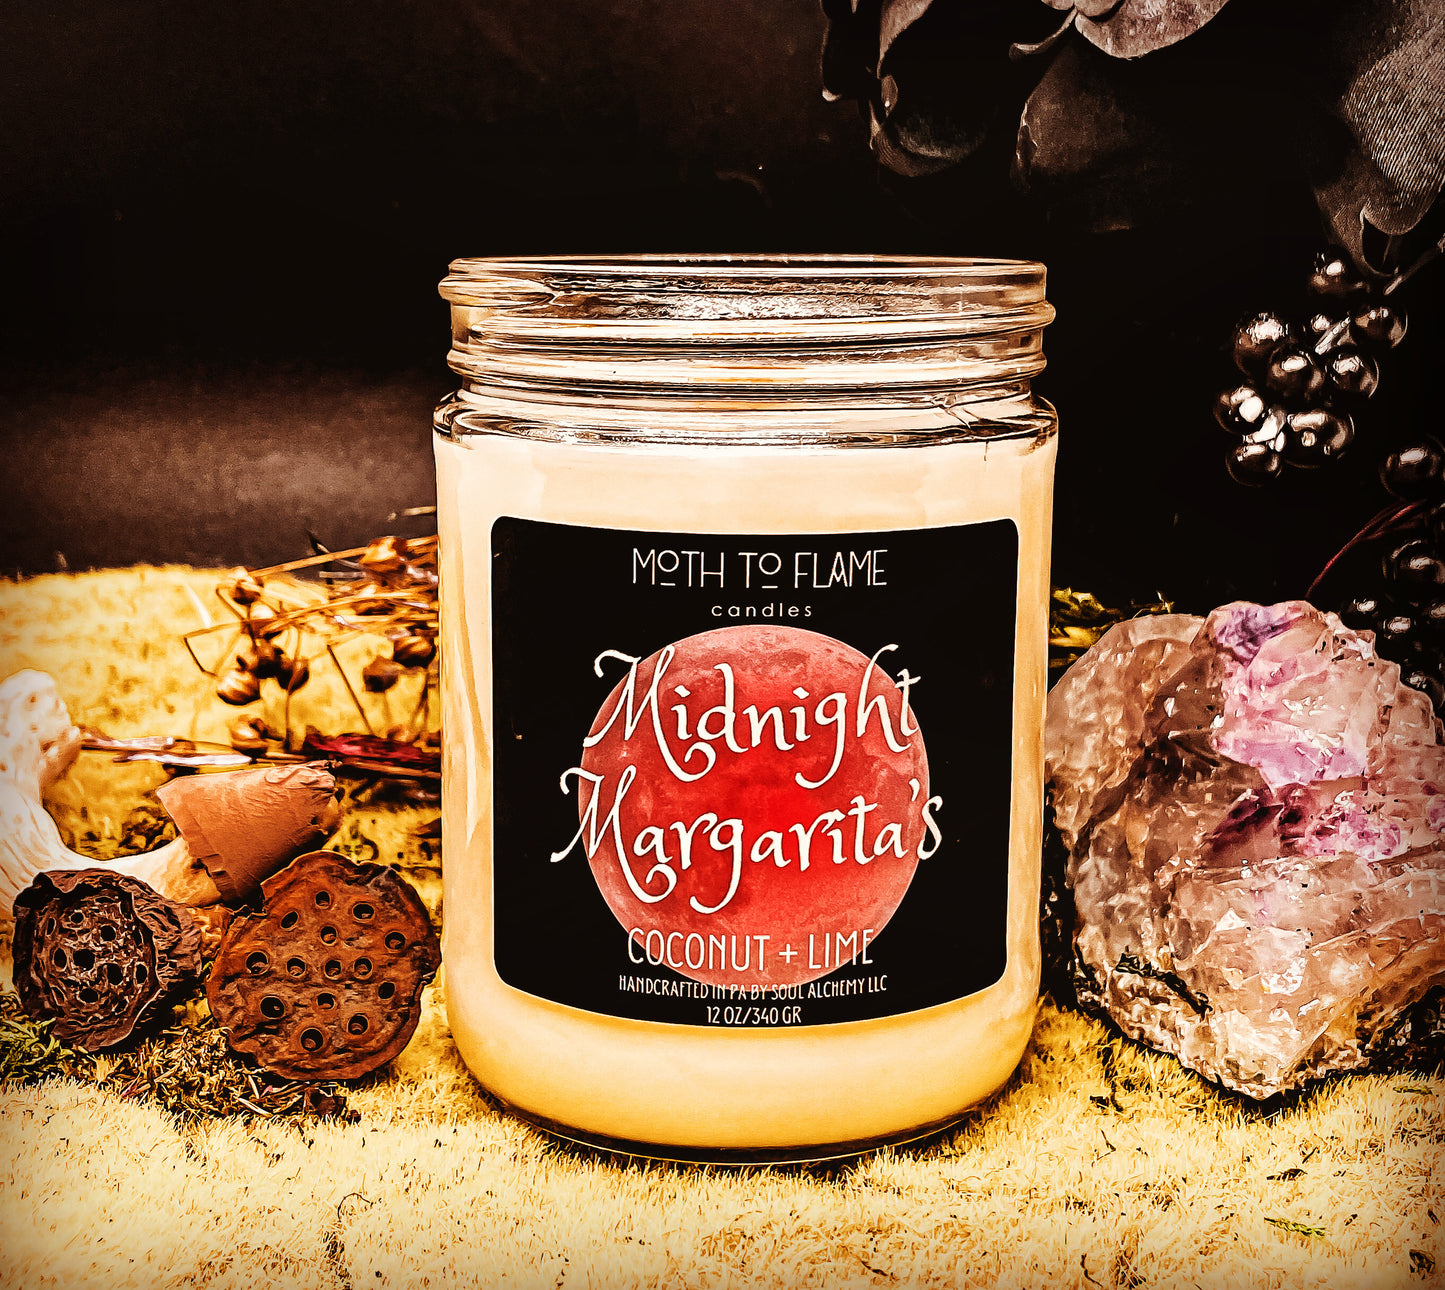 Midnight Margarita’s - Moth to Flame Candles